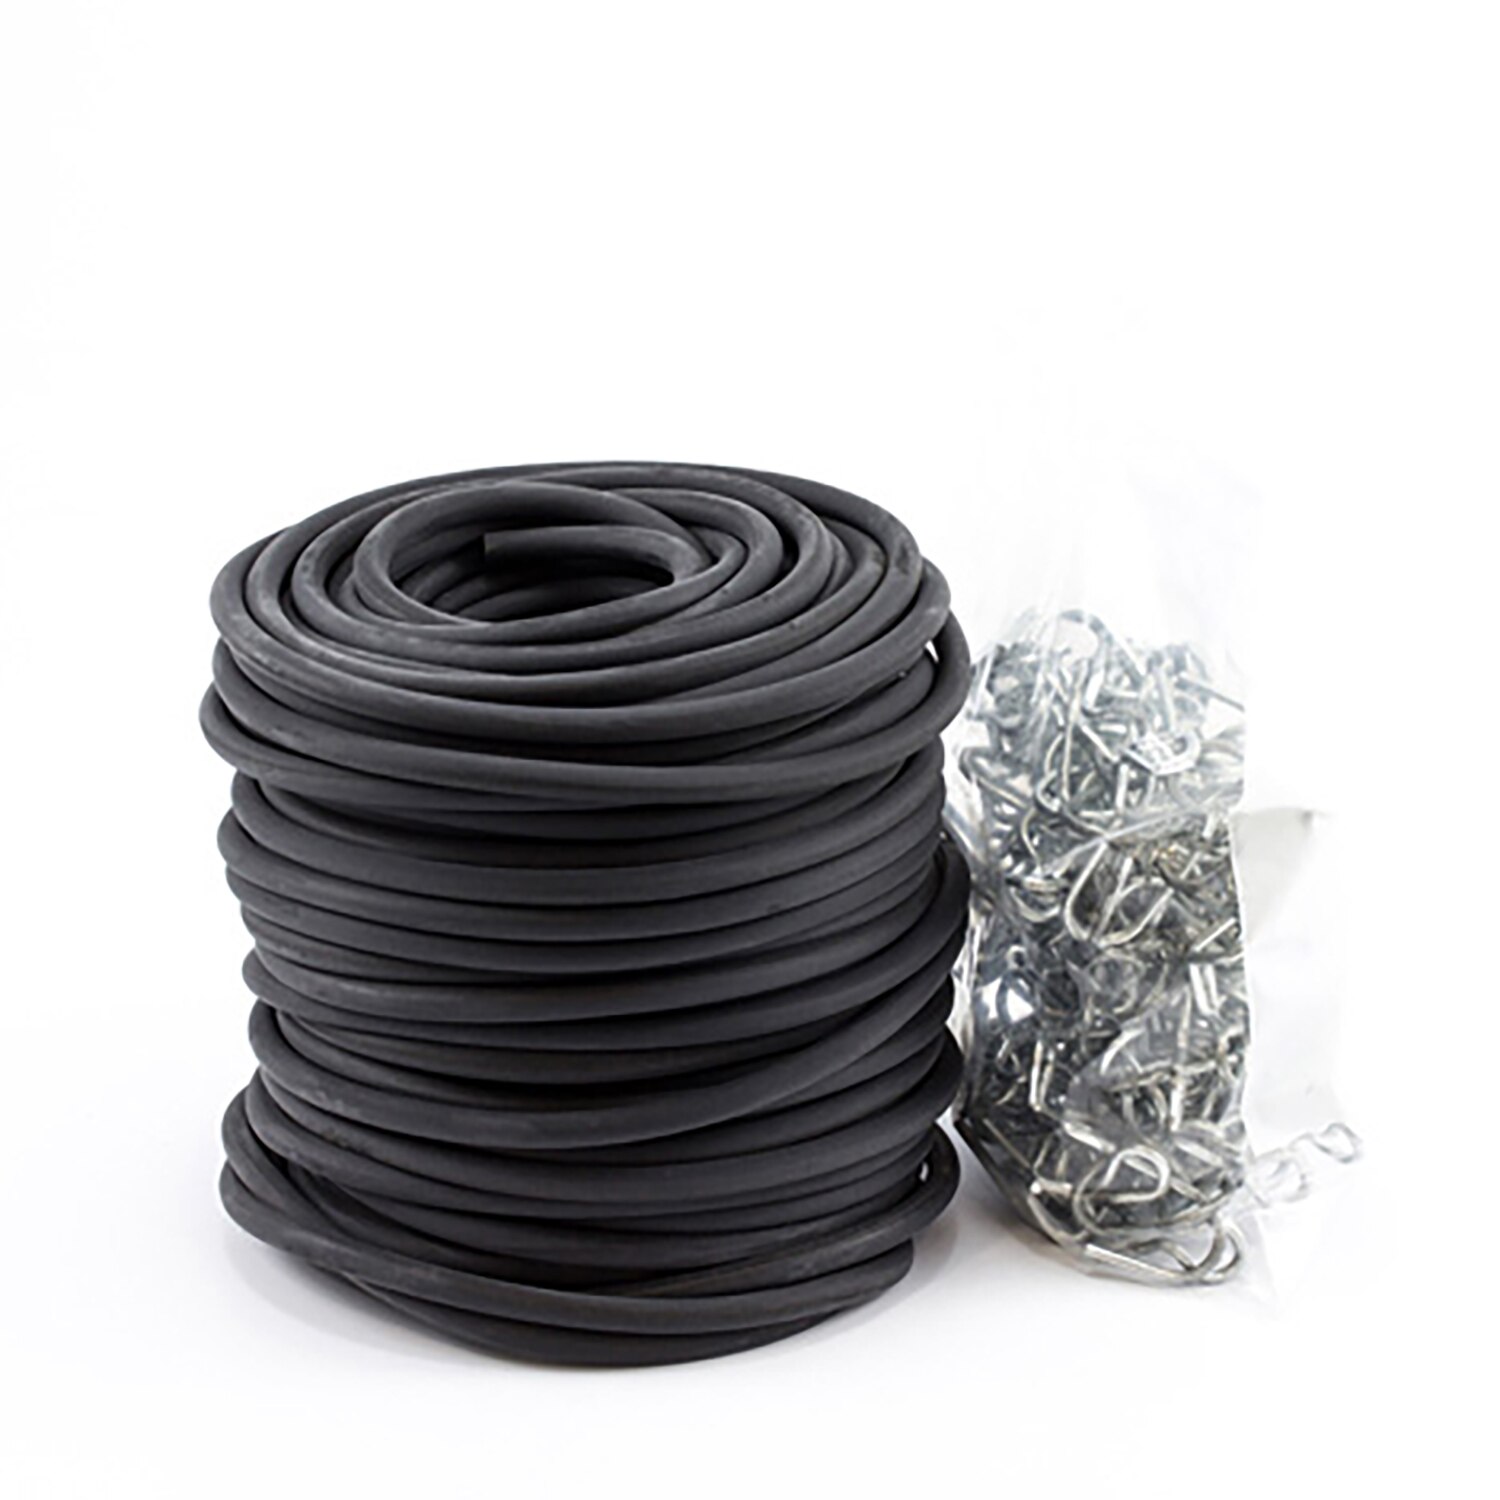 Synthetic Rubber (EPDM) Rope 3/8 Coil with 150 Double Eye Hooks